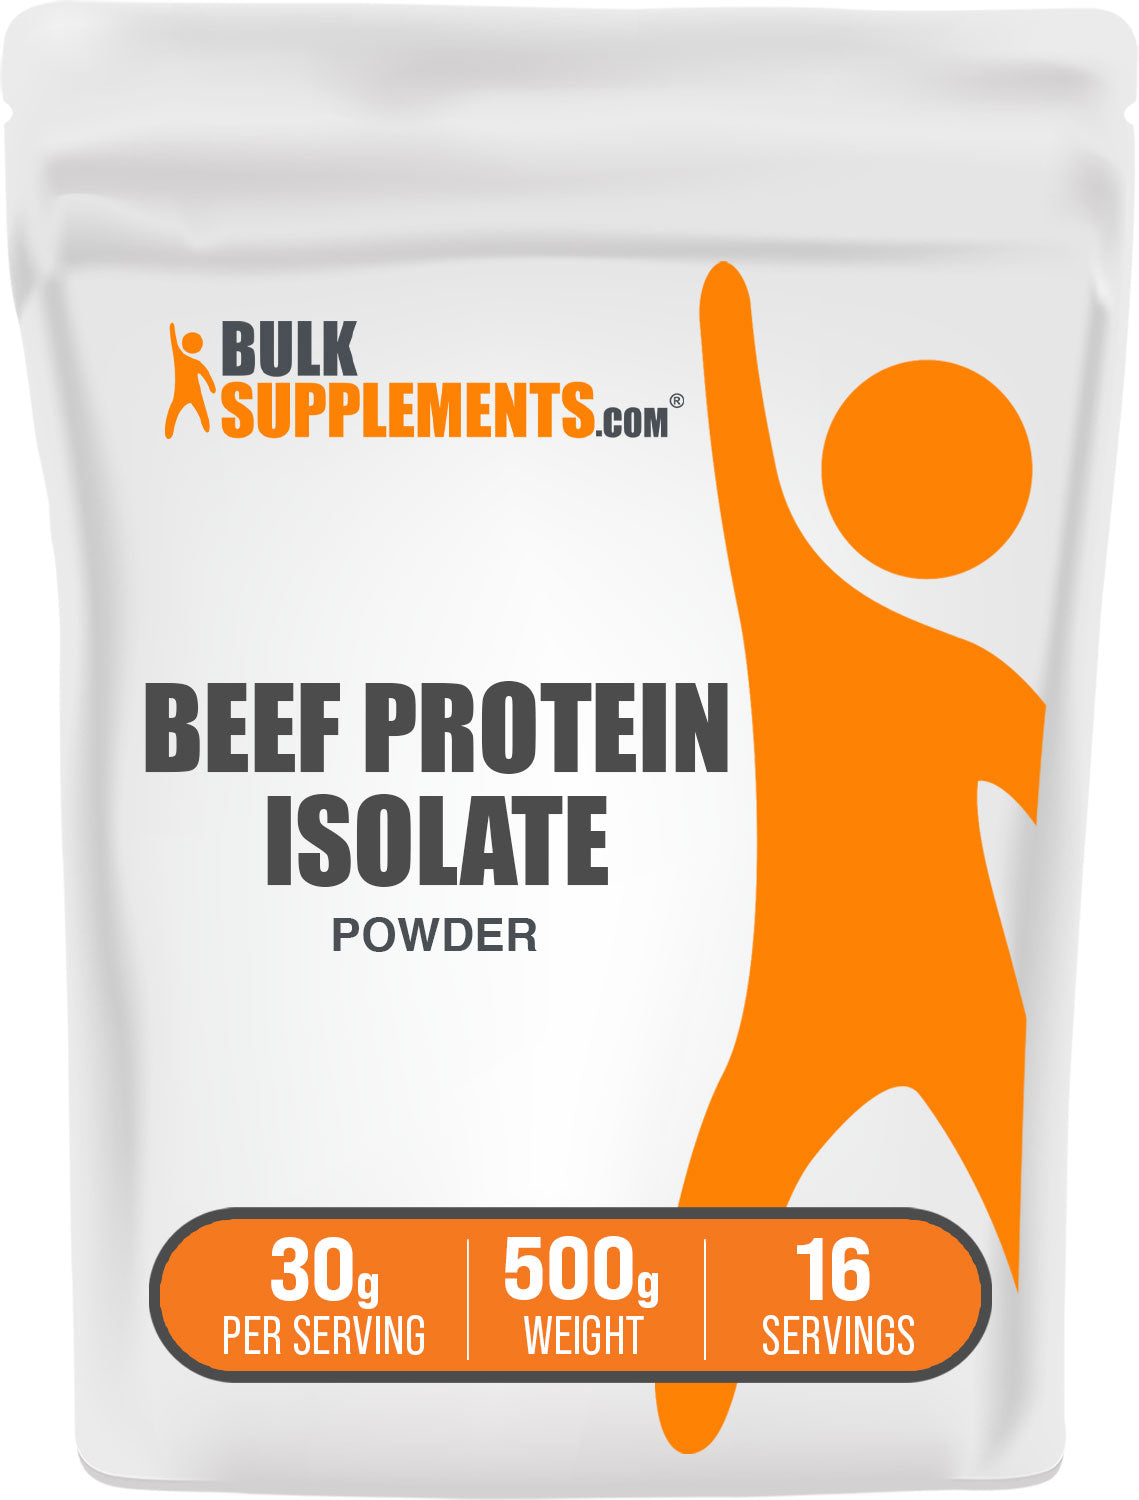 BulkSupplements.com Beef Protein Isolate powder bag 500g